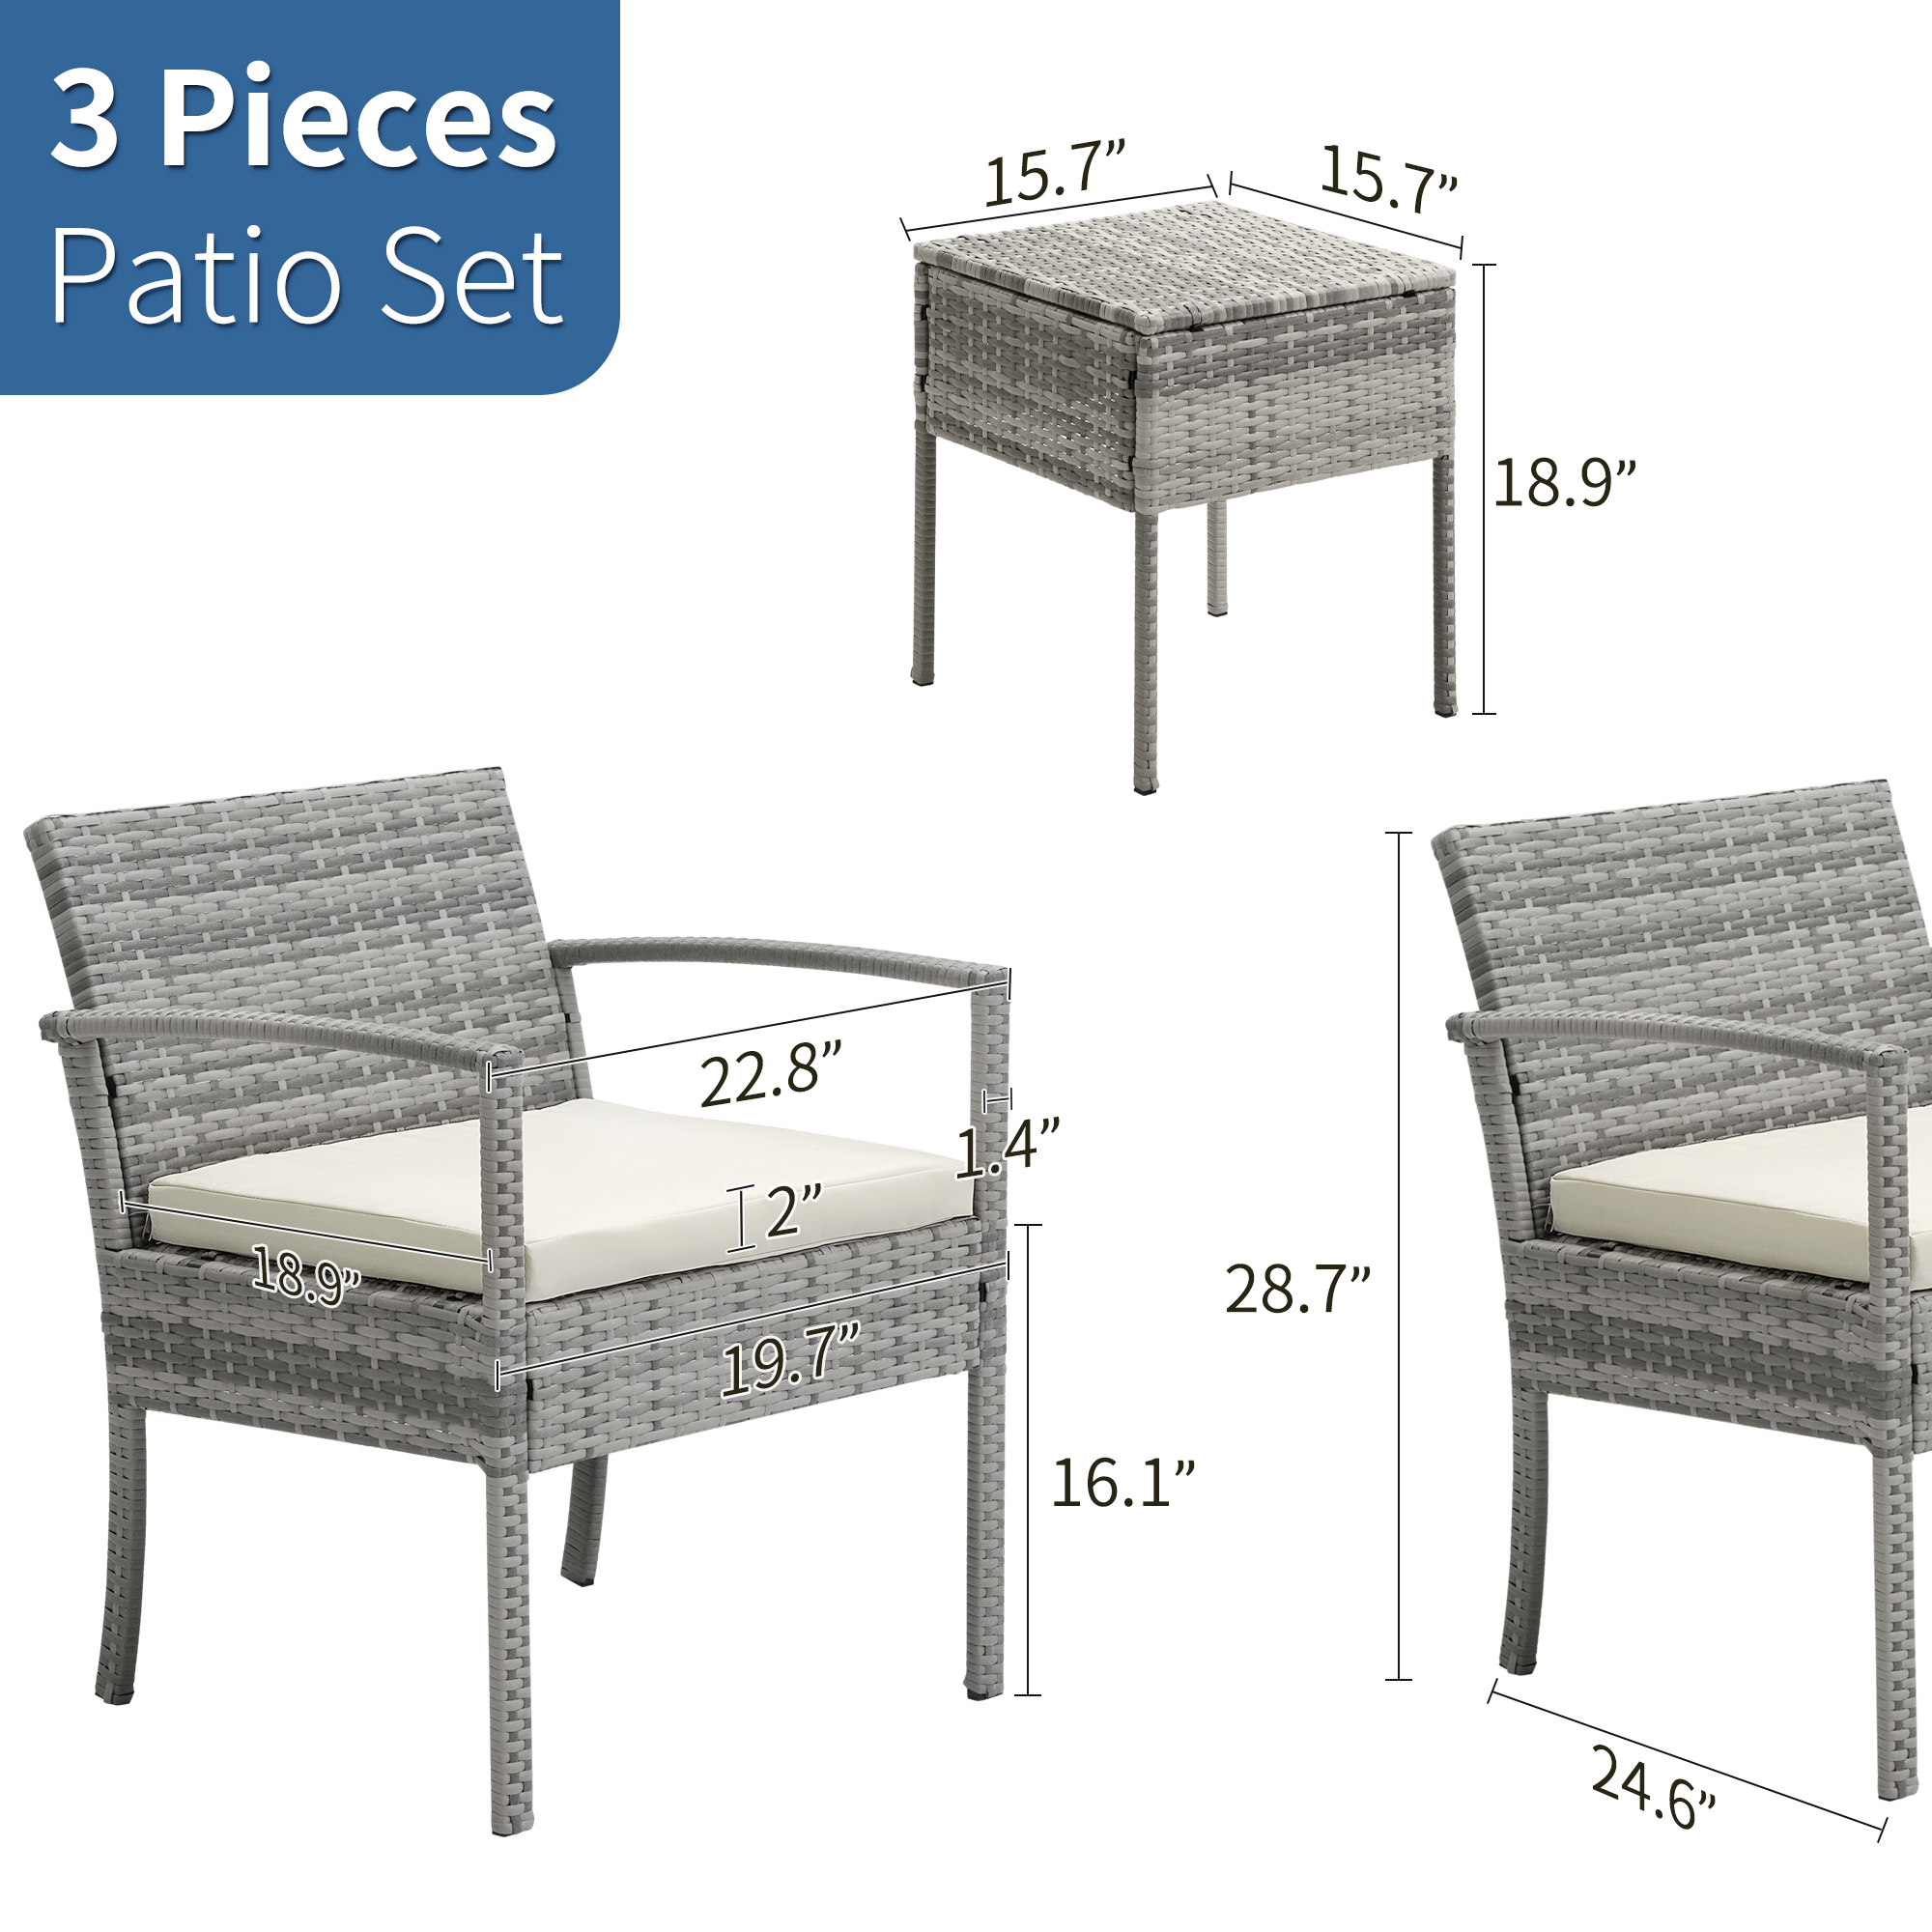 FHFO 3 Pieces Wicker Bistro Set, Outdoor Rattan Patio Conversation Set with Cushions for Garden Balcony Backyard Porch Lawn, Grey Rattan & White Cushion - image 3 of 7